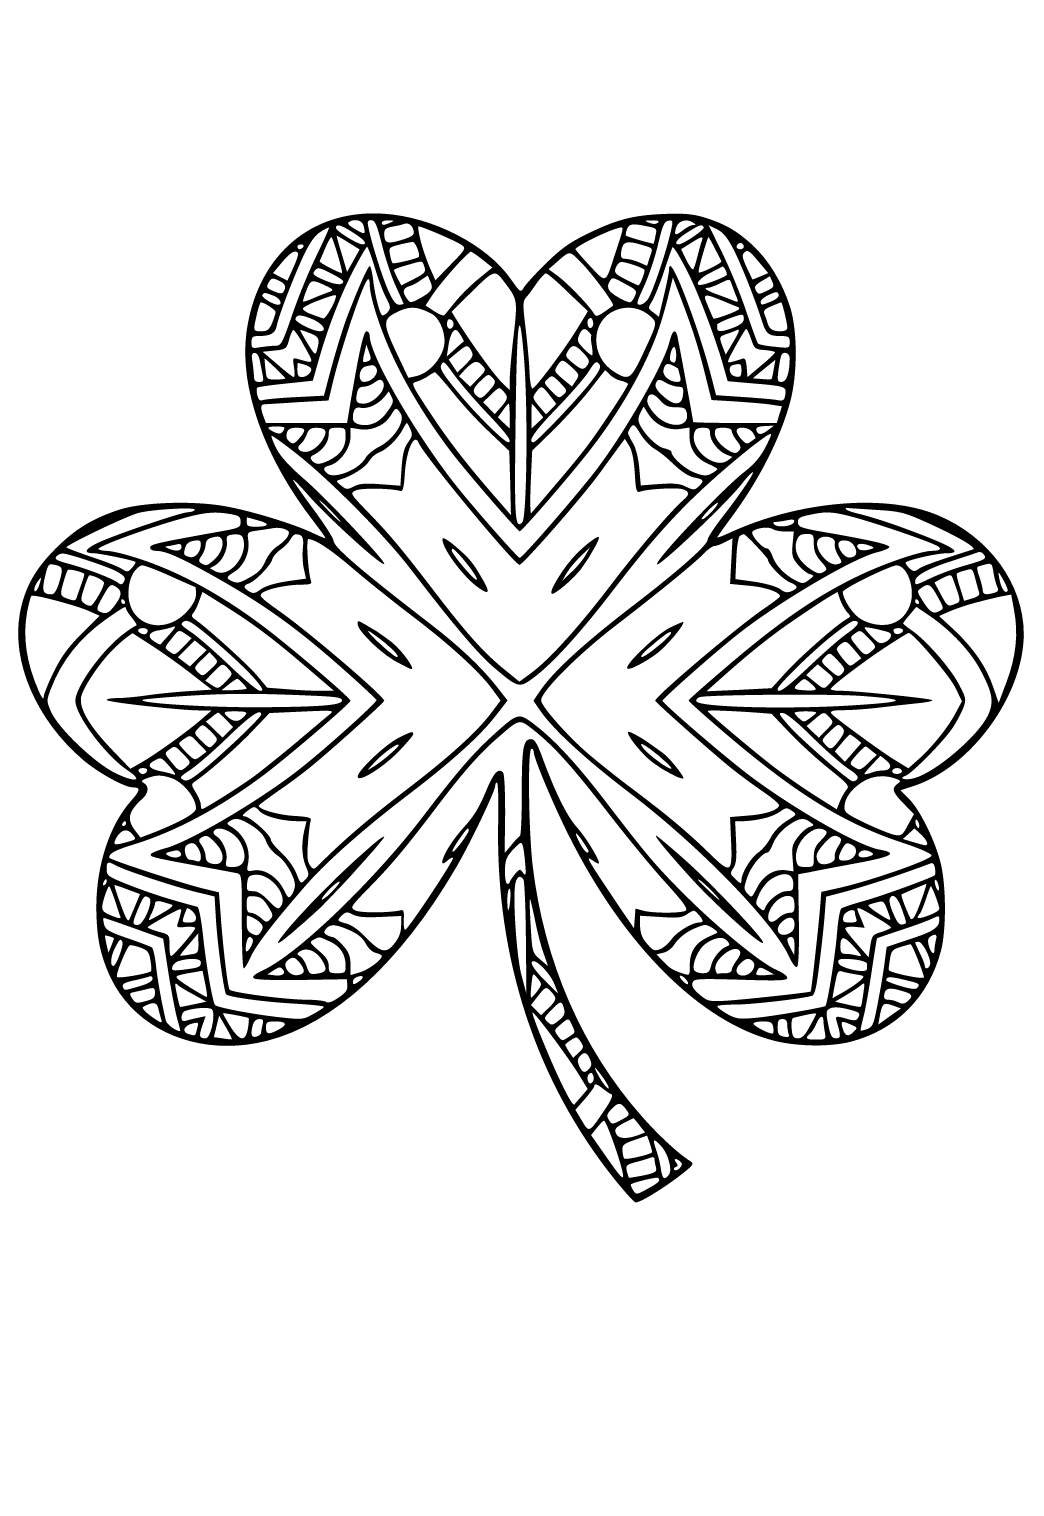 Free printable shamrock mandala coloring page for adults and kids